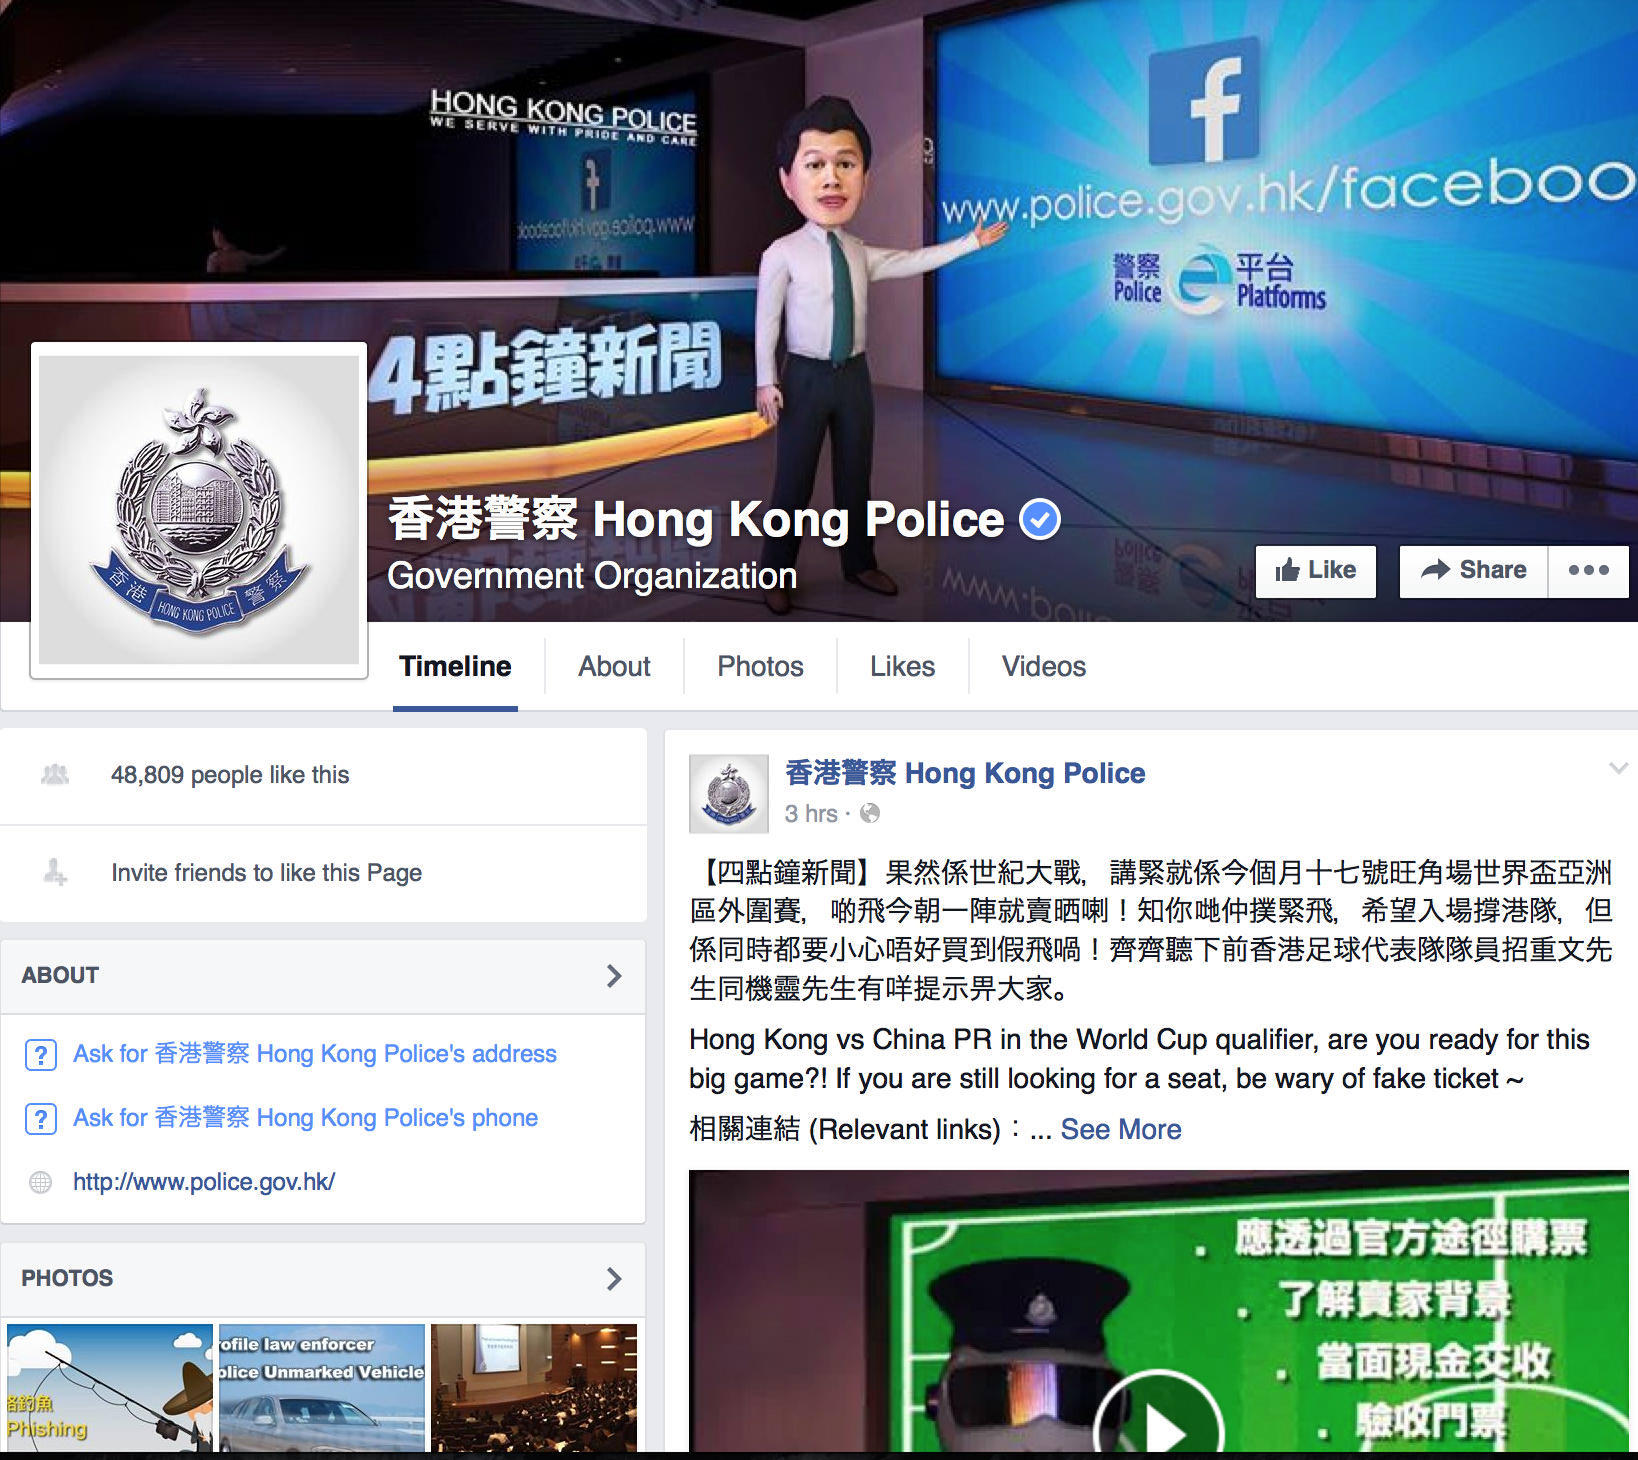 The police were not entirely forthcoming about their Facebook page. Photo: SCMP Pictures